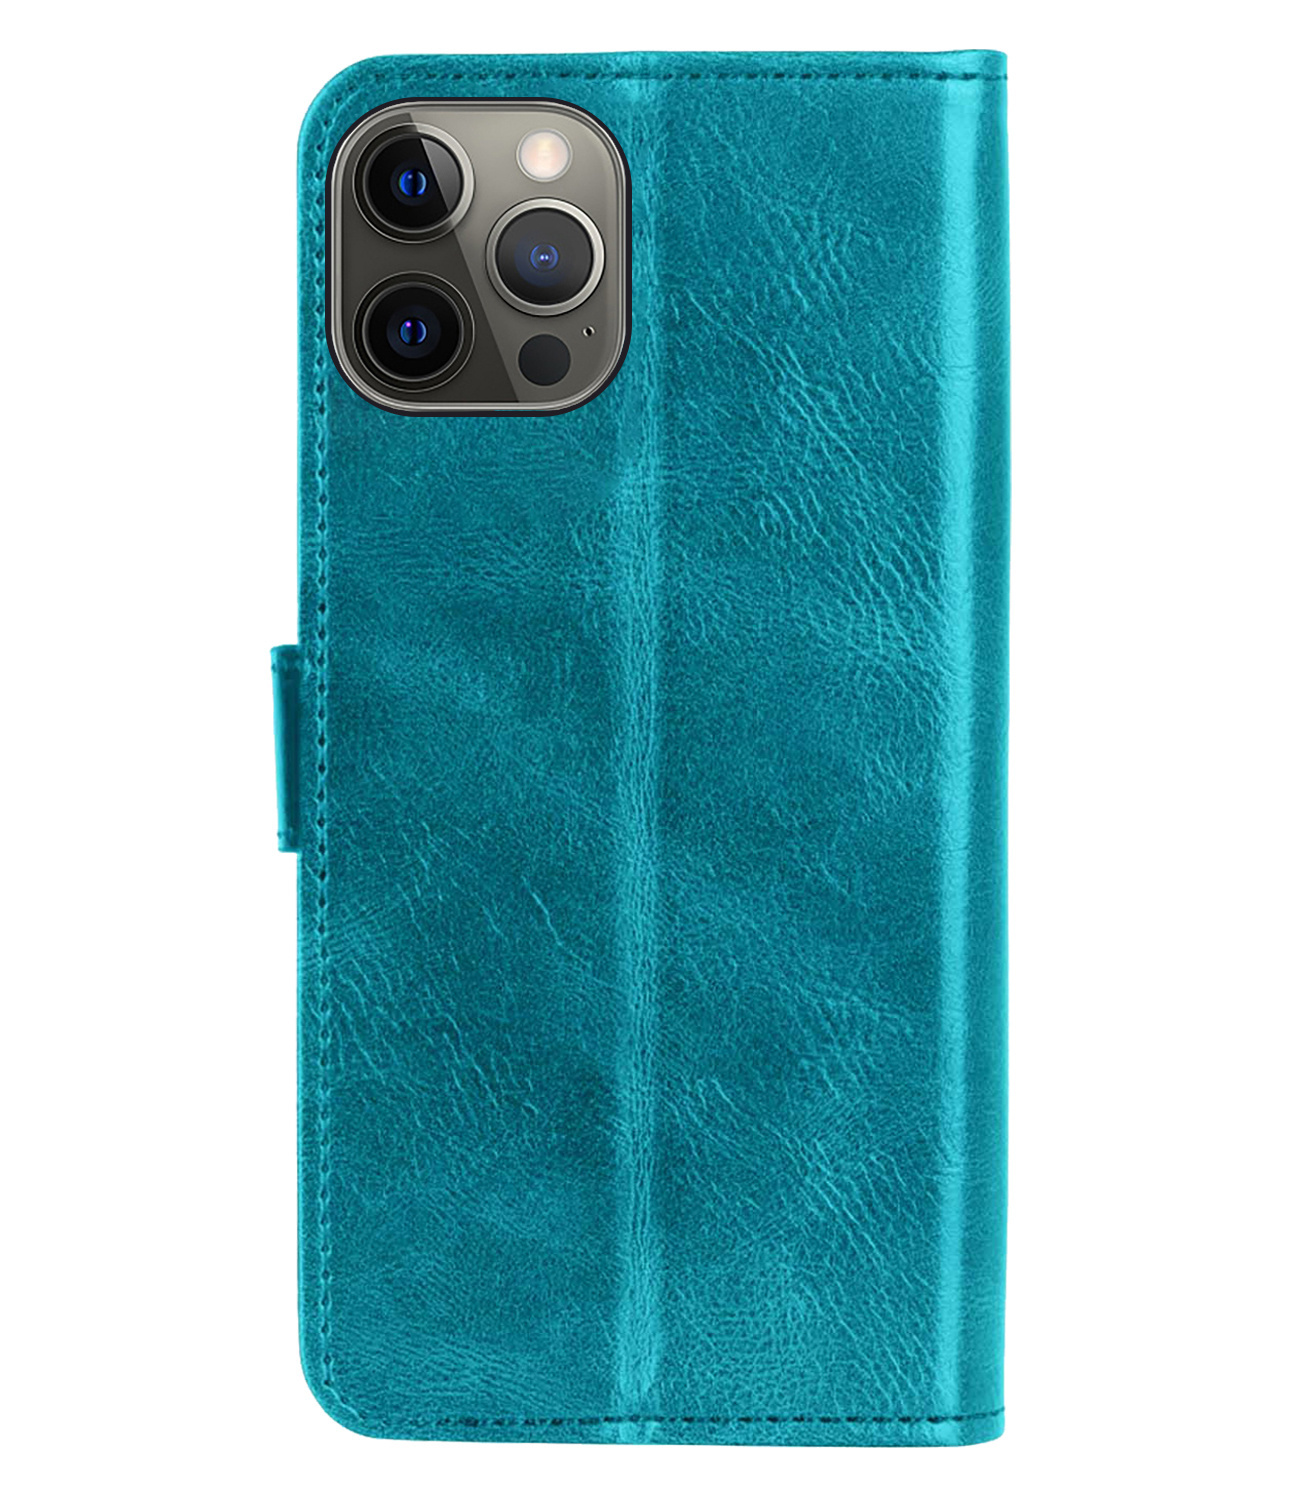 Hoes voor iPhone 14 Pro Hoes Bookcase Flipcase Book Cover - Hoes voor iPhone 14 Pro Hoesje Book Case - Turquoise